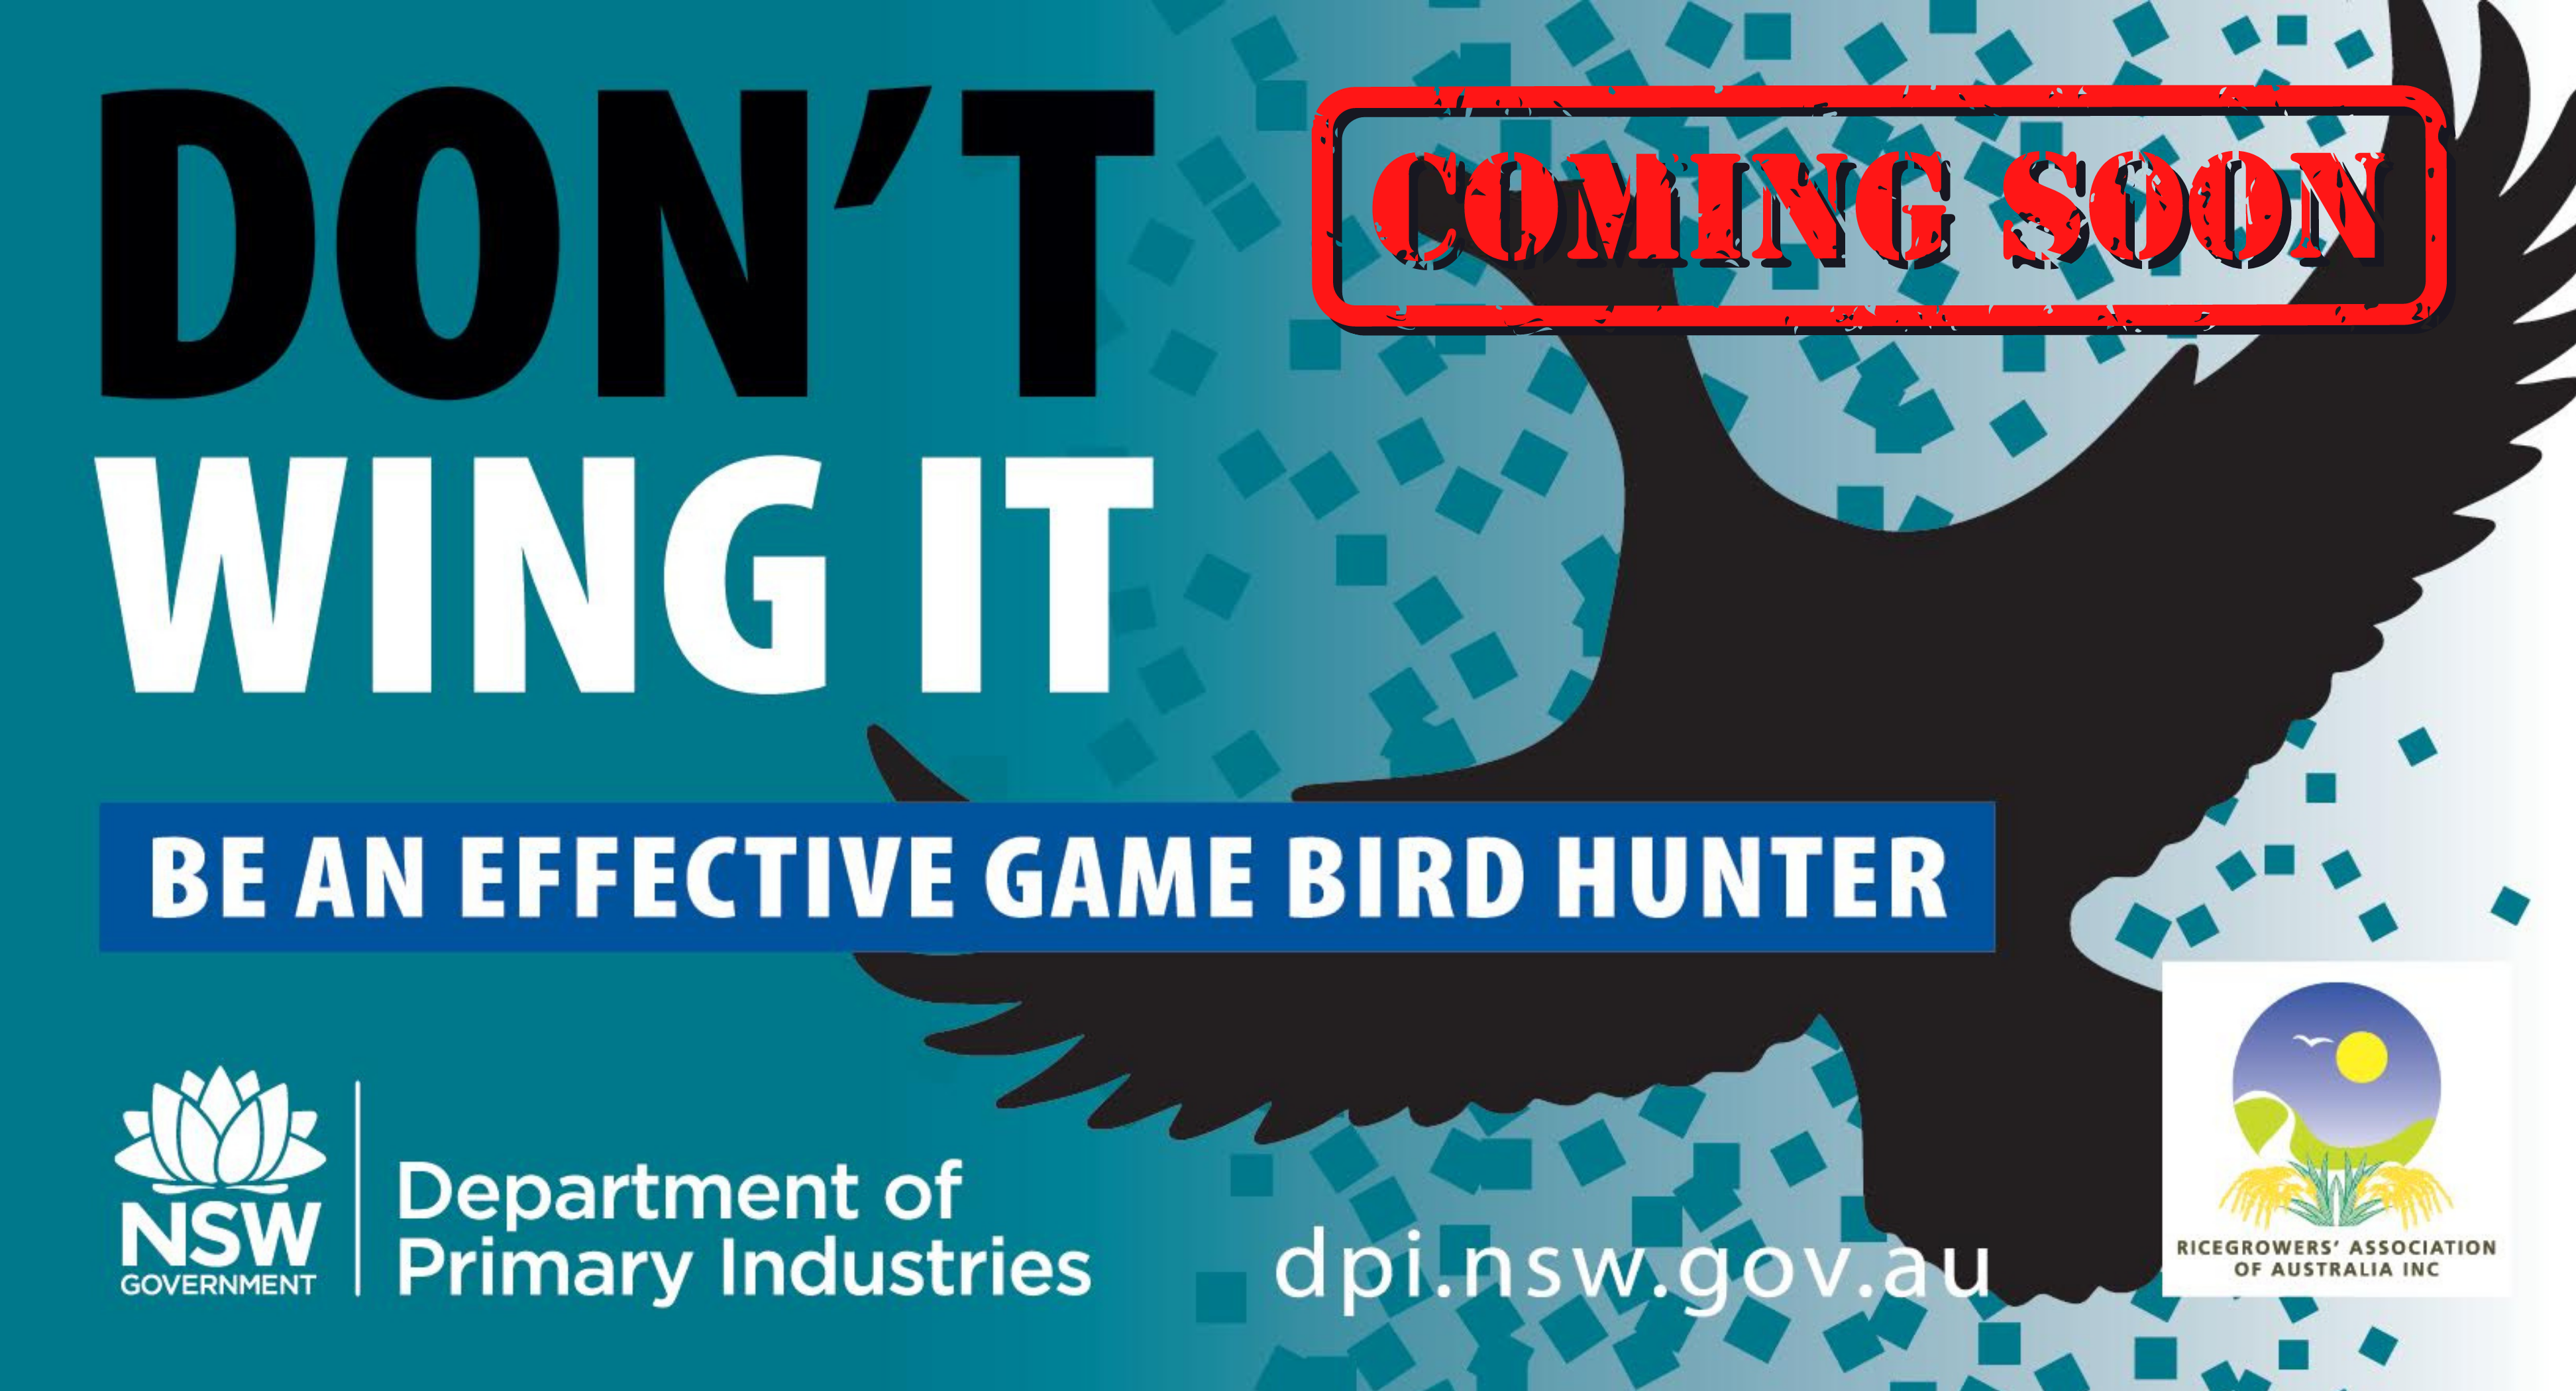 DON’T WING IT. BE AN EFFECTIVE GAME BIRD HUNTER.